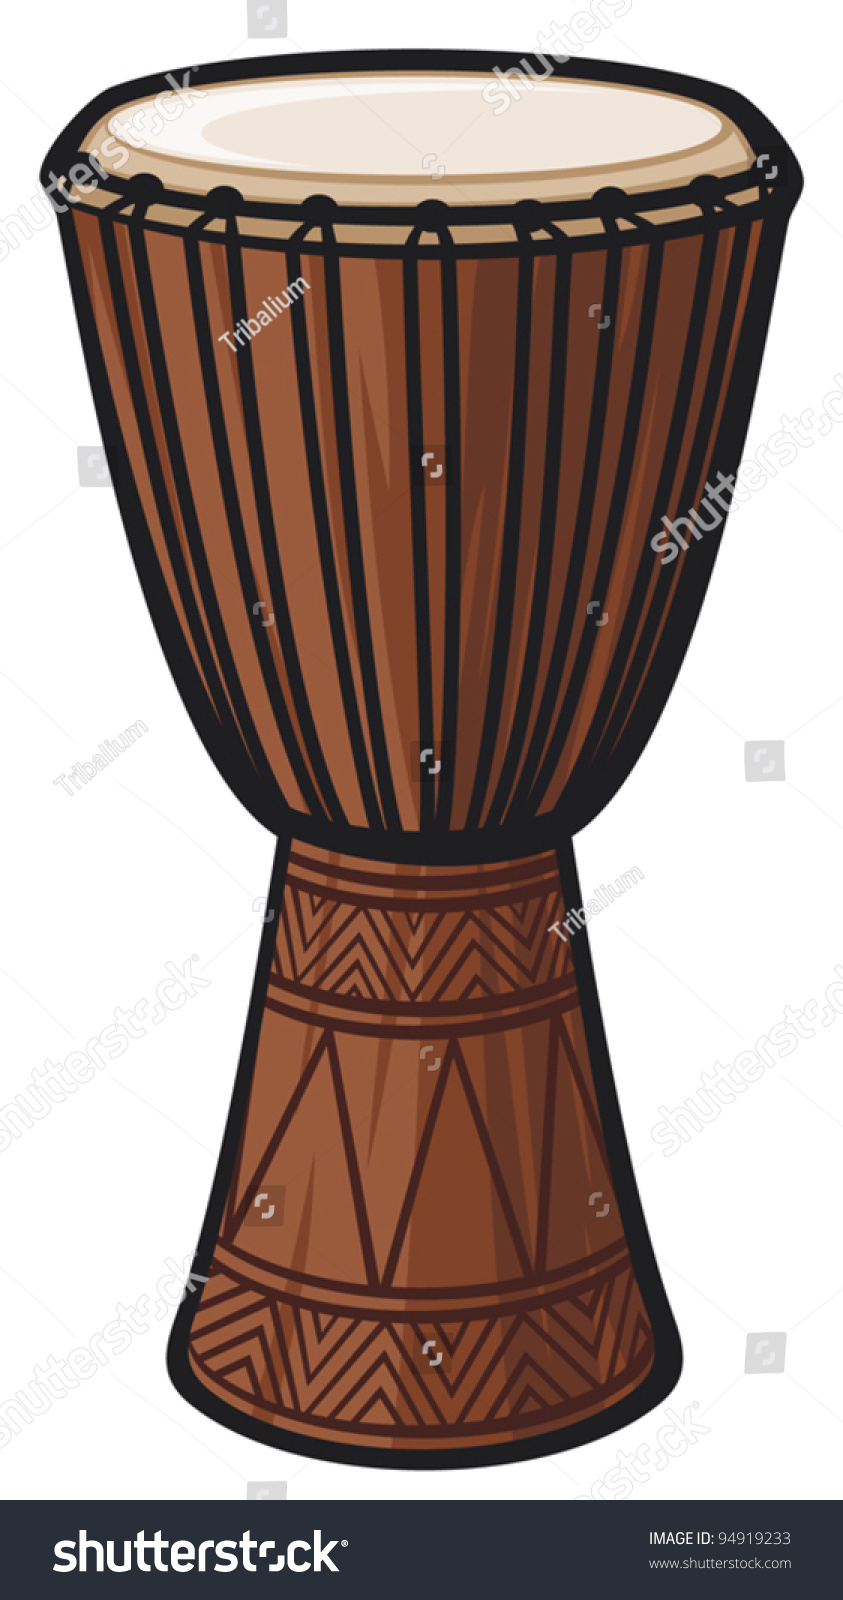 african drums clipart - photo #21